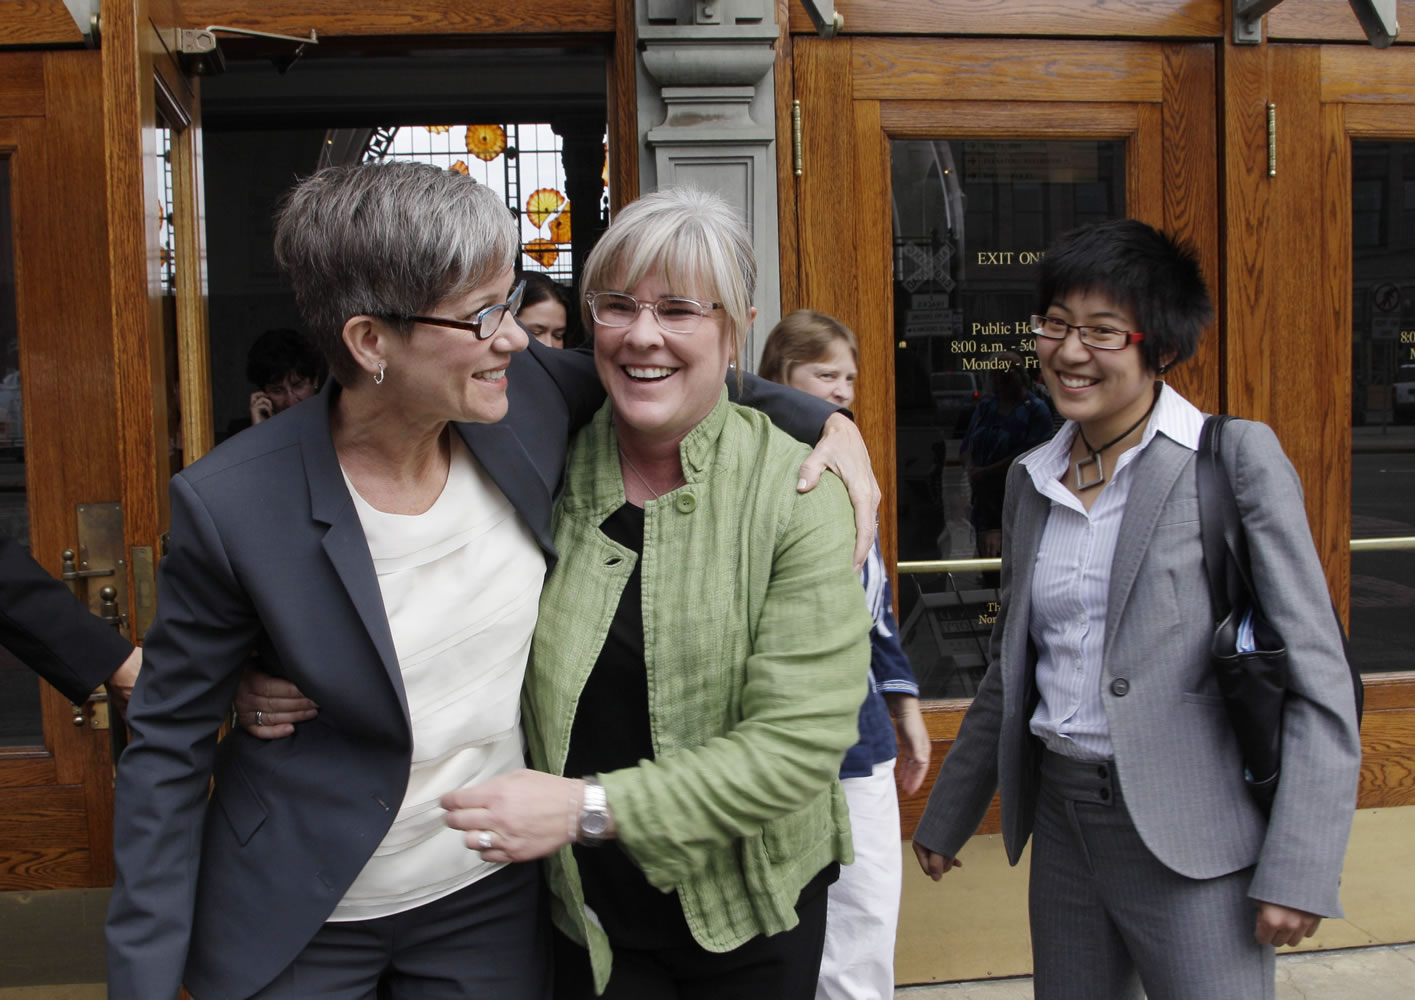 Sher Kung, right, a Seattle lawyer who worked with the ACLU, was killed in a bicycle accident Friday, Aug. 29, 2014.  In this photo taken Sept. 24, 2010, she looks on as Margaret Witt, center, and Witt's partner, Laurie McChesney, left, celebrate as they leave the federal courthouse in Tacoma, Wash.